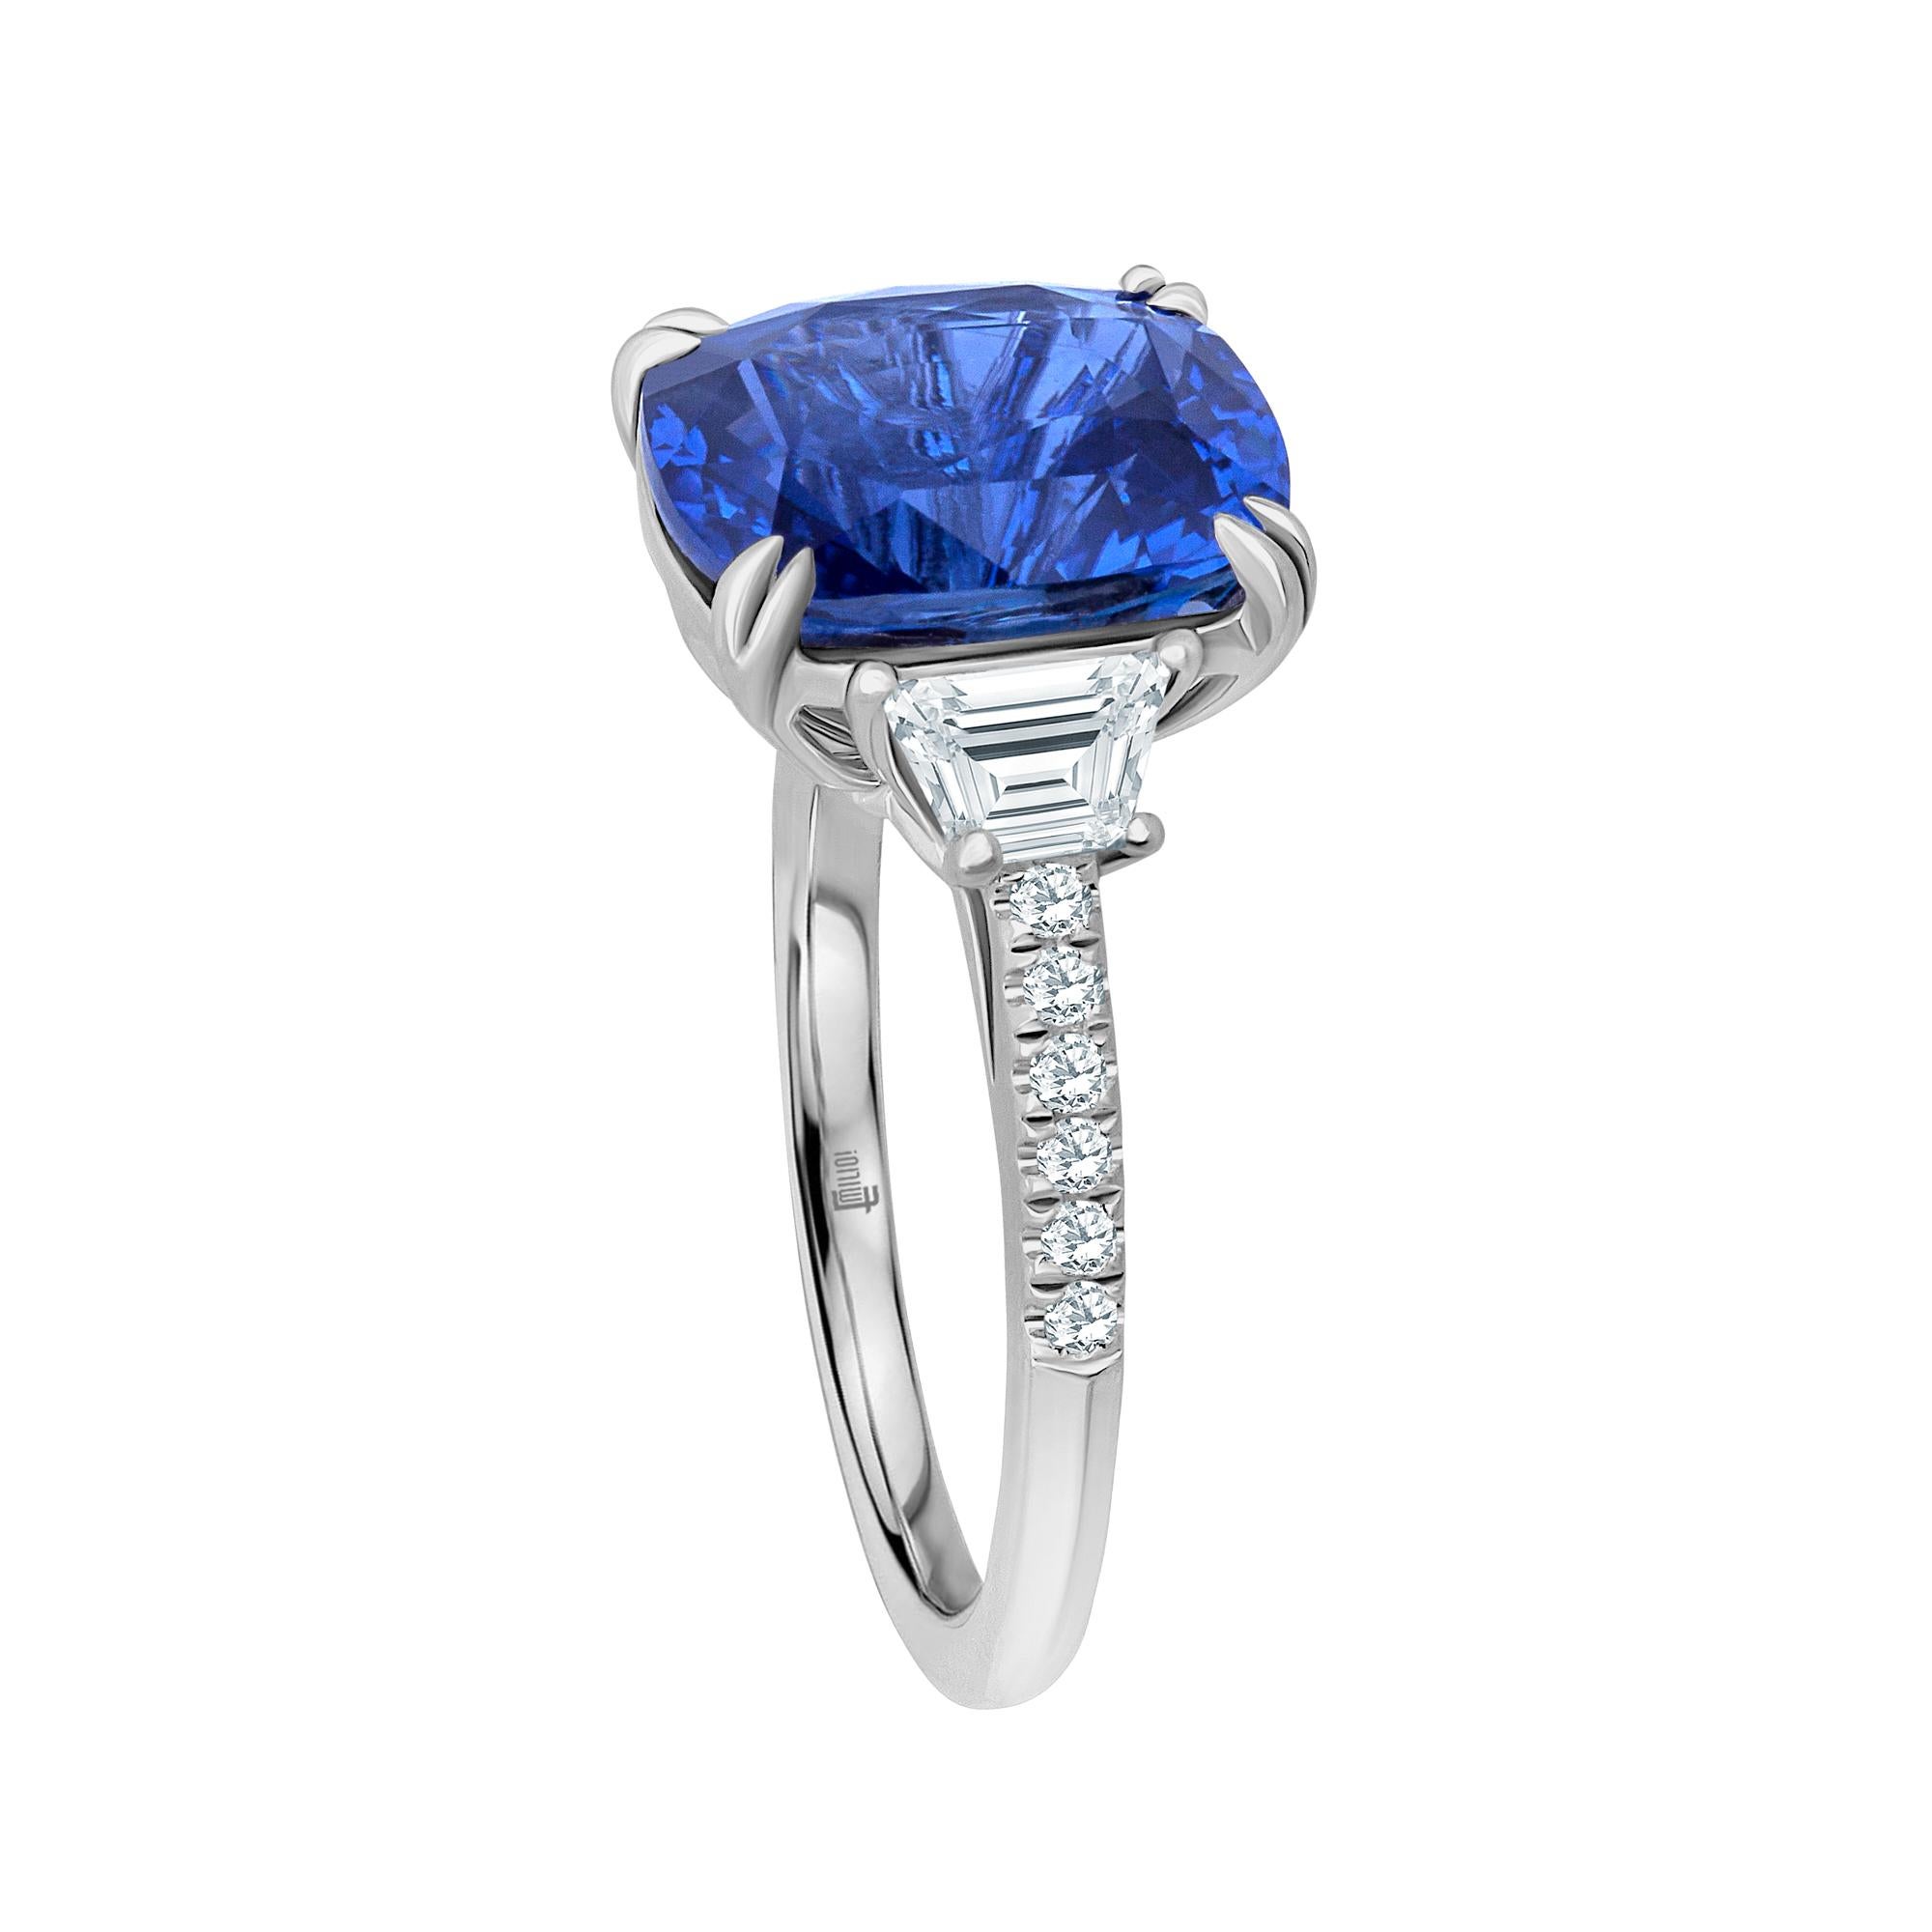 Emilio Jewelry Certified Cushion Sapphire Diamond Platinum Ring 
This amazing ring is unique and well thought out before Emilio designed it! Most women today want a ring that is striking, yet humble enough to wear to perform everyday errands. This